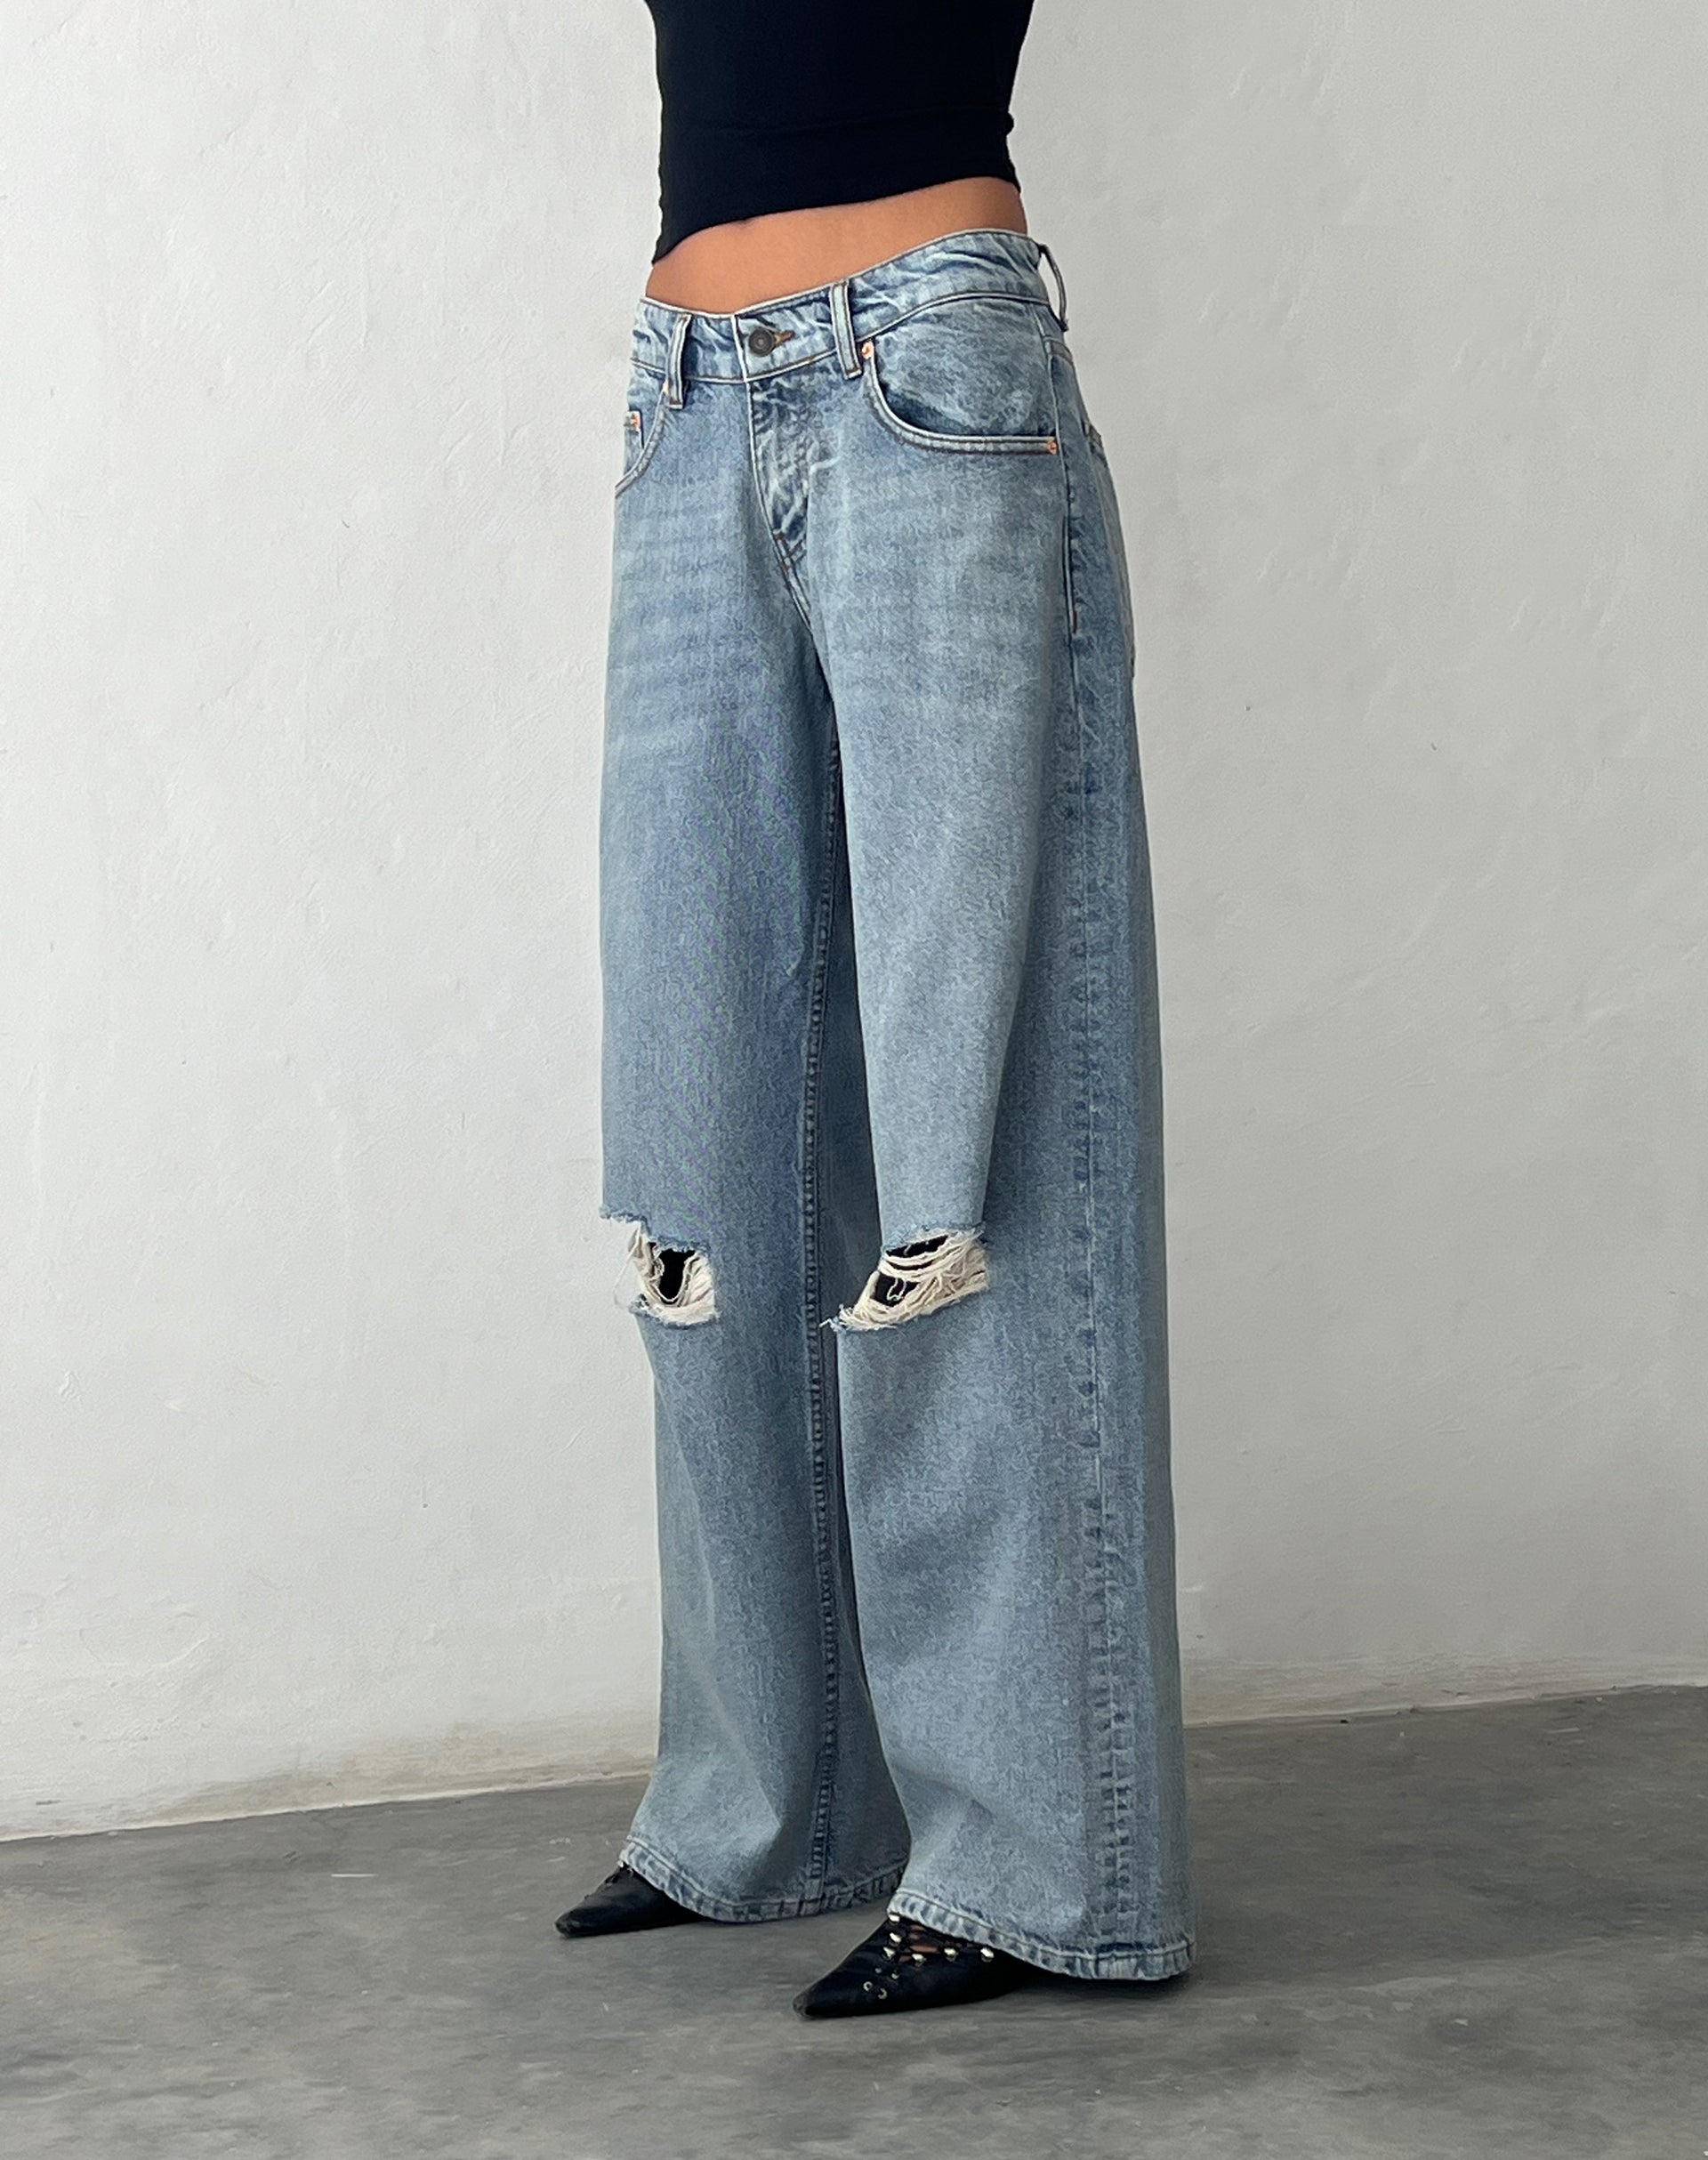 image of Ripped Roomy Extra Wide Low Rise Jean in Vintage Blue Wash